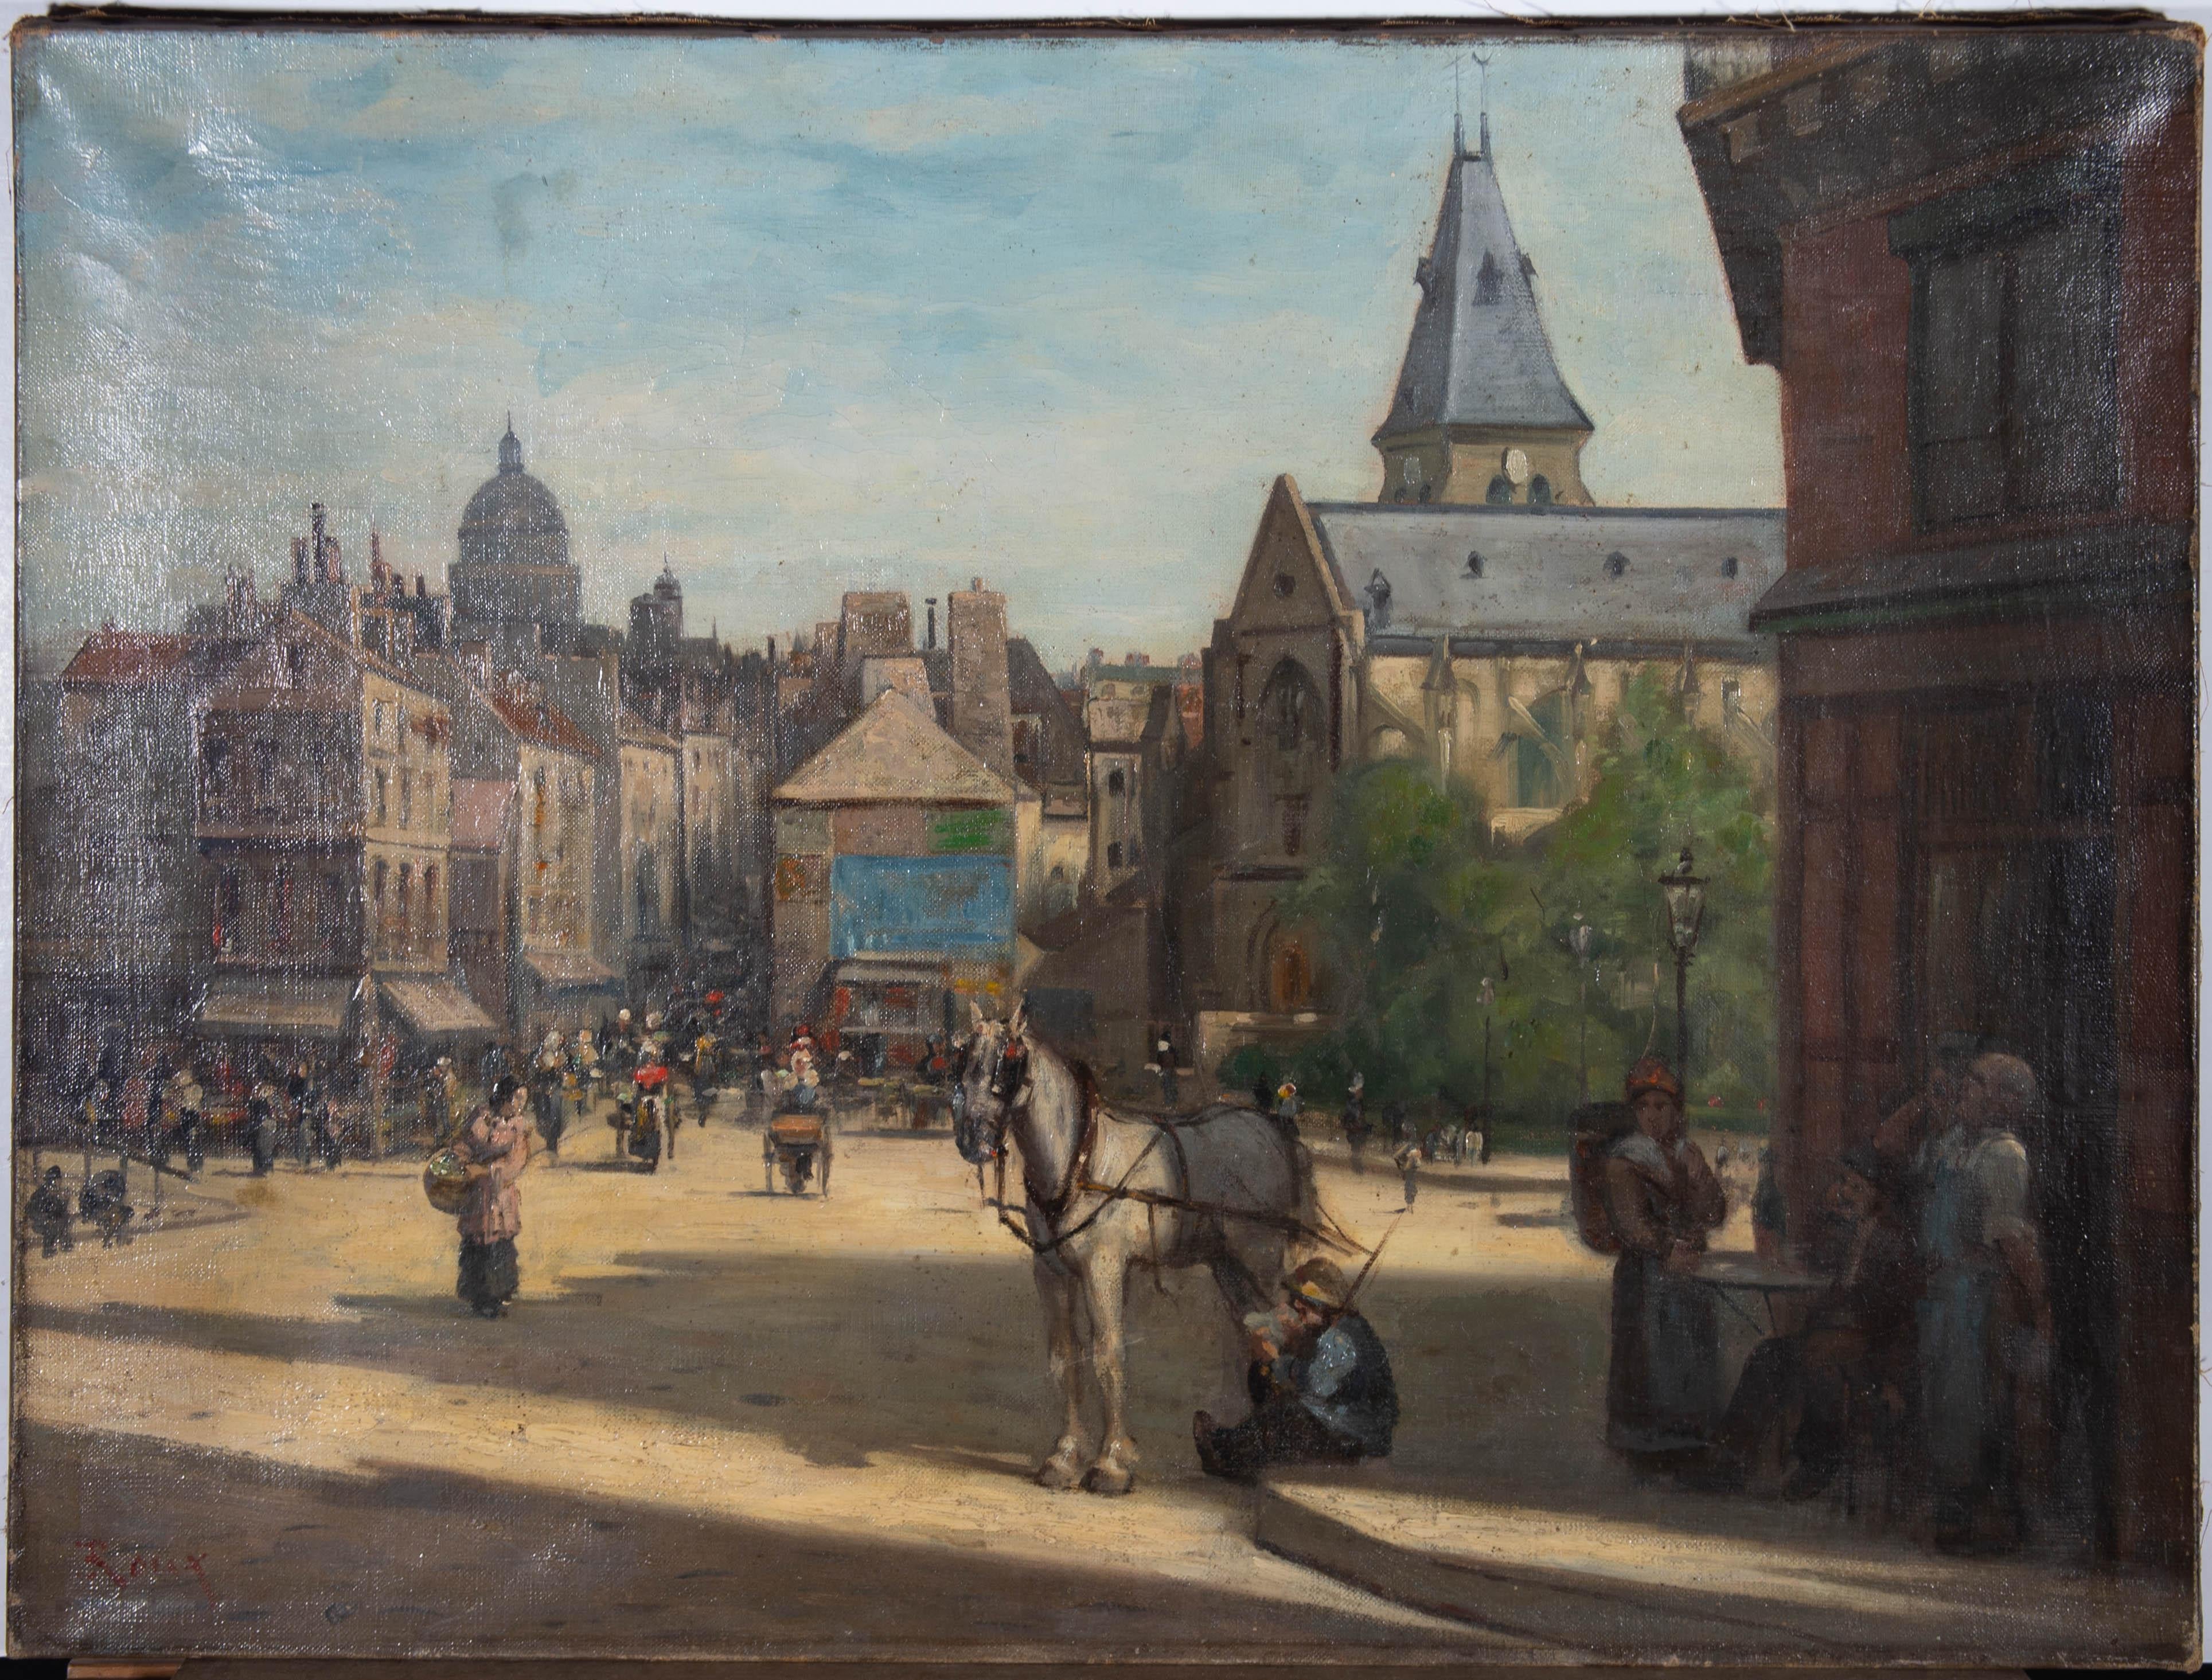 This charming study depicts a bustling market square with figures carrying baskets of goods, milling the streets and working. To the distance there is a sweeping view of the rooftops of a continental town. The artist has captured the lively square